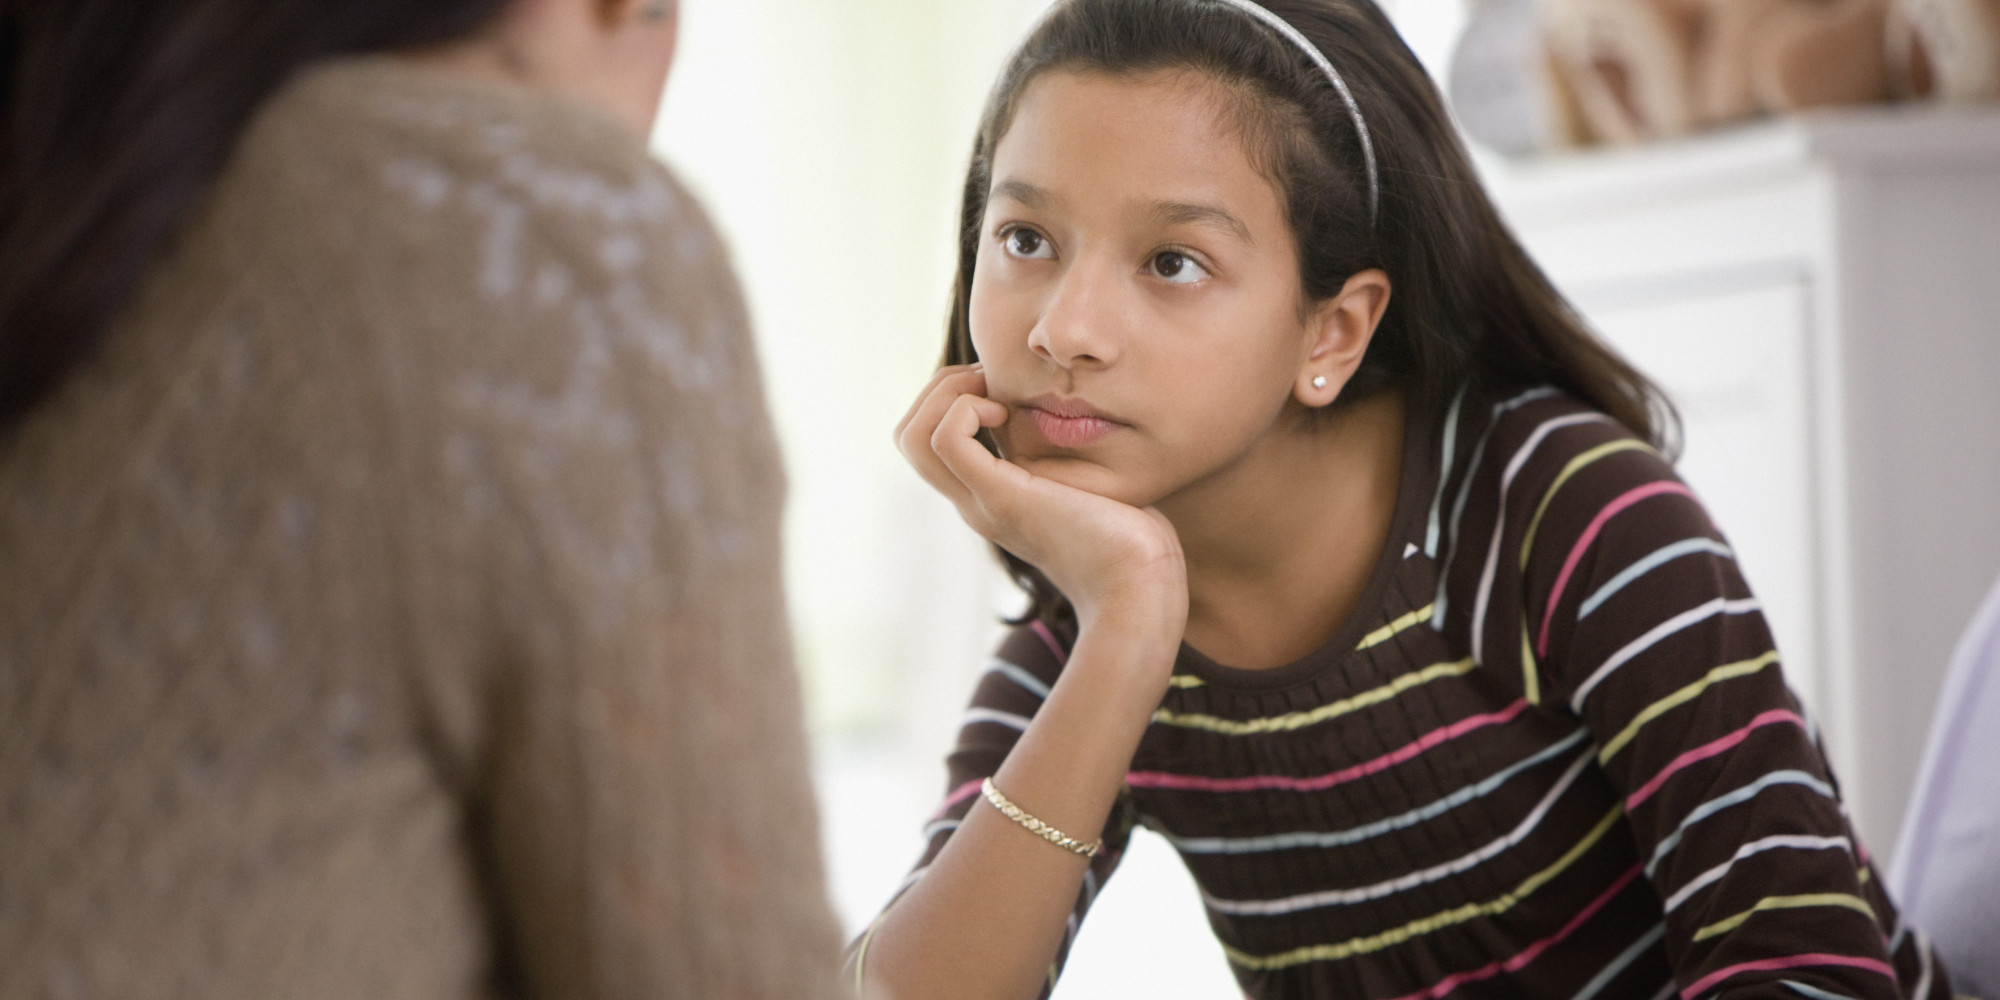 Early Puberty In Girls Linked To Higher Risk Of Problem Behaviors